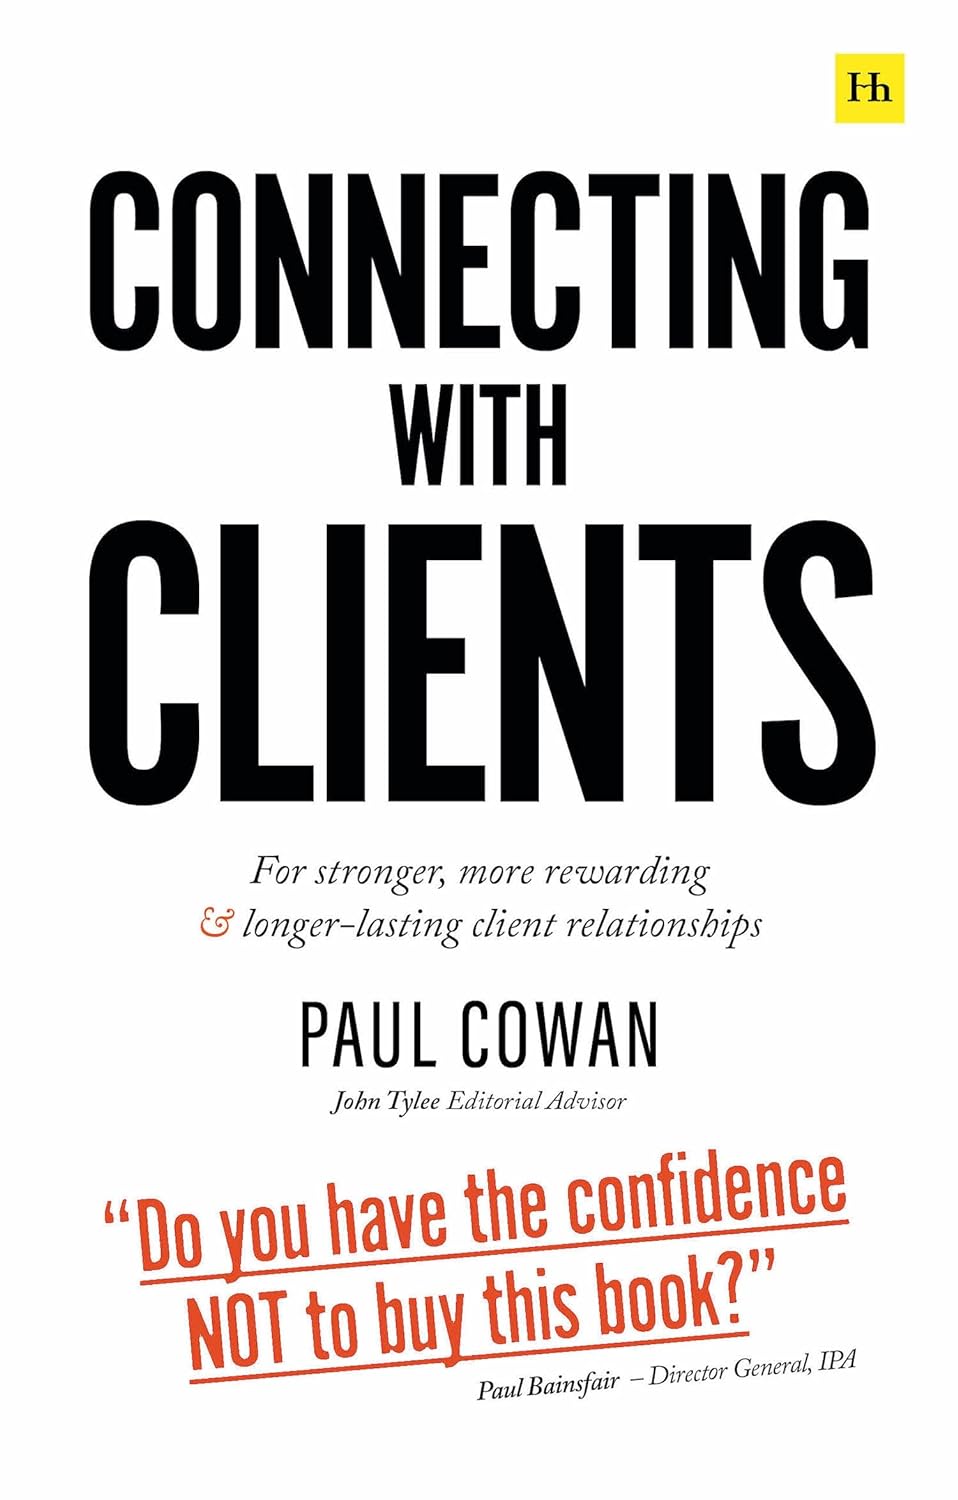 Connecting with Clients: For stronger, more rewarding and longer-lasting client relationships Paperback – March 30, 2021